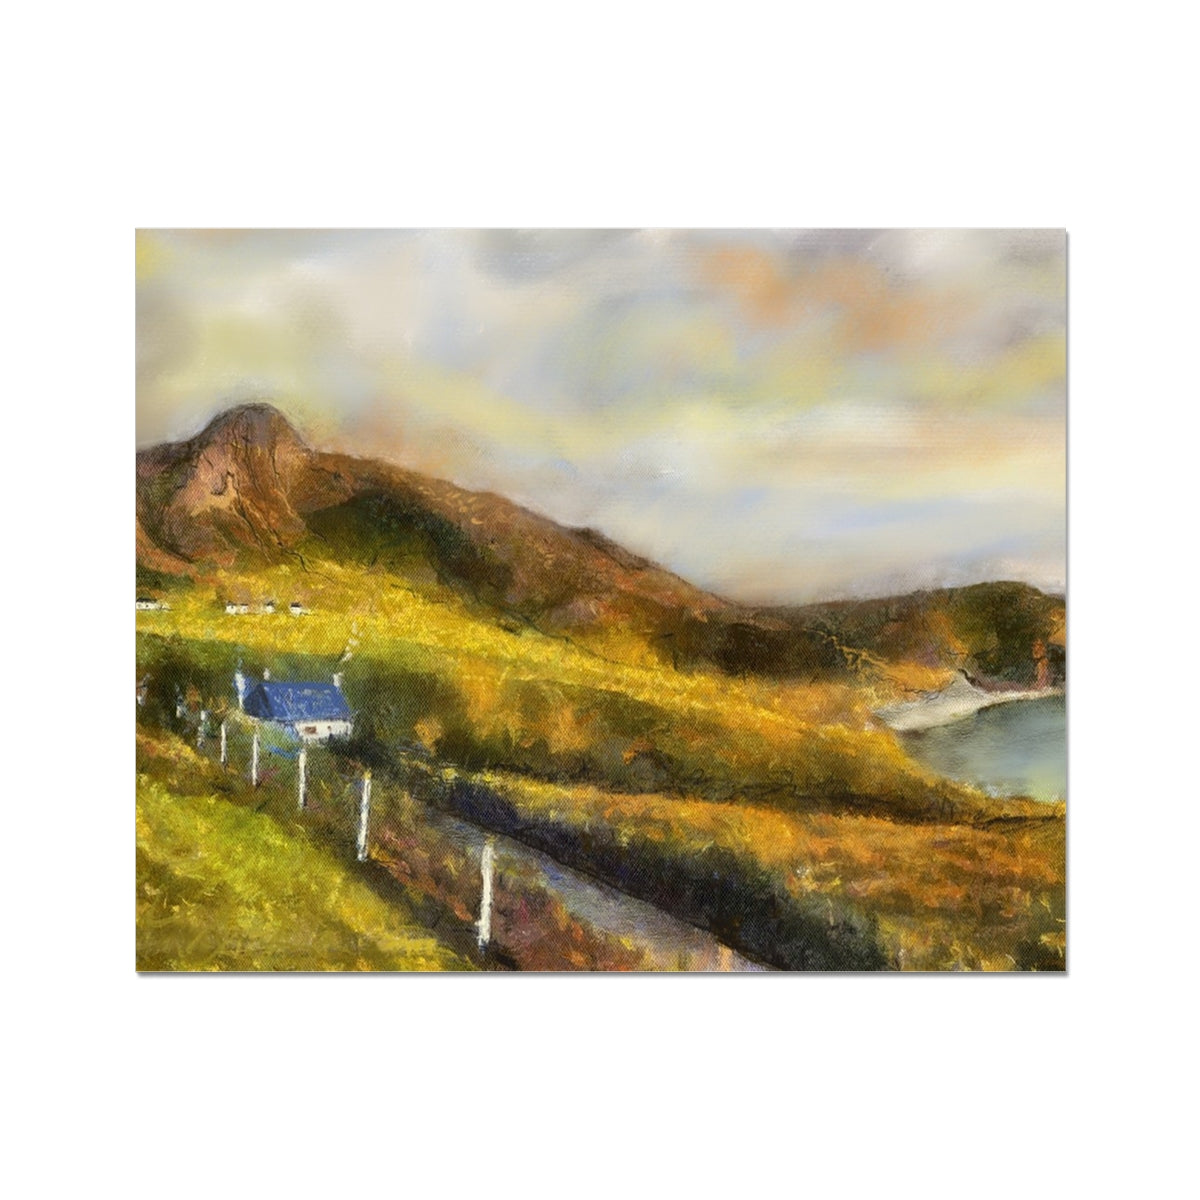 Coldbackie Painting | Artist Proof Collector Prints From Scotland-Artist Proof Collector Prints-Scottish Highlands & Lowlands Art Gallery-20"x16"-Paintings, Prints, Homeware, Art Gifts From Scotland By Scottish Artist Kevin Hunter